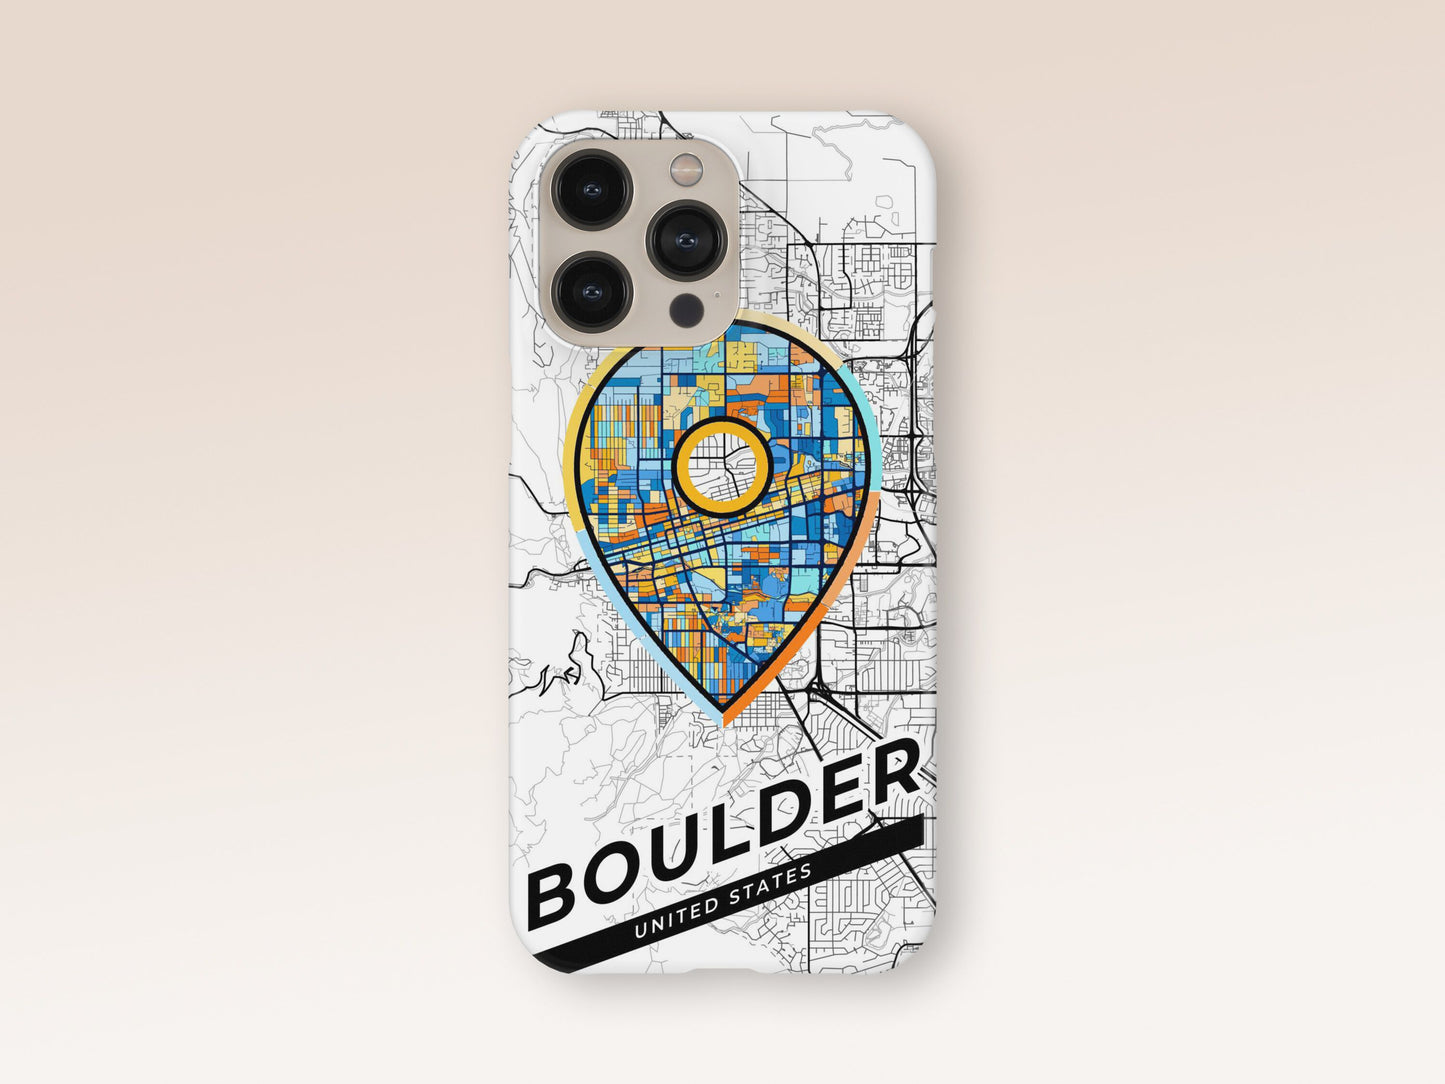 Boulder Colorado slim phone case with colorful icon. Birthday, wedding or housewarming gift. Couple match cases. 1